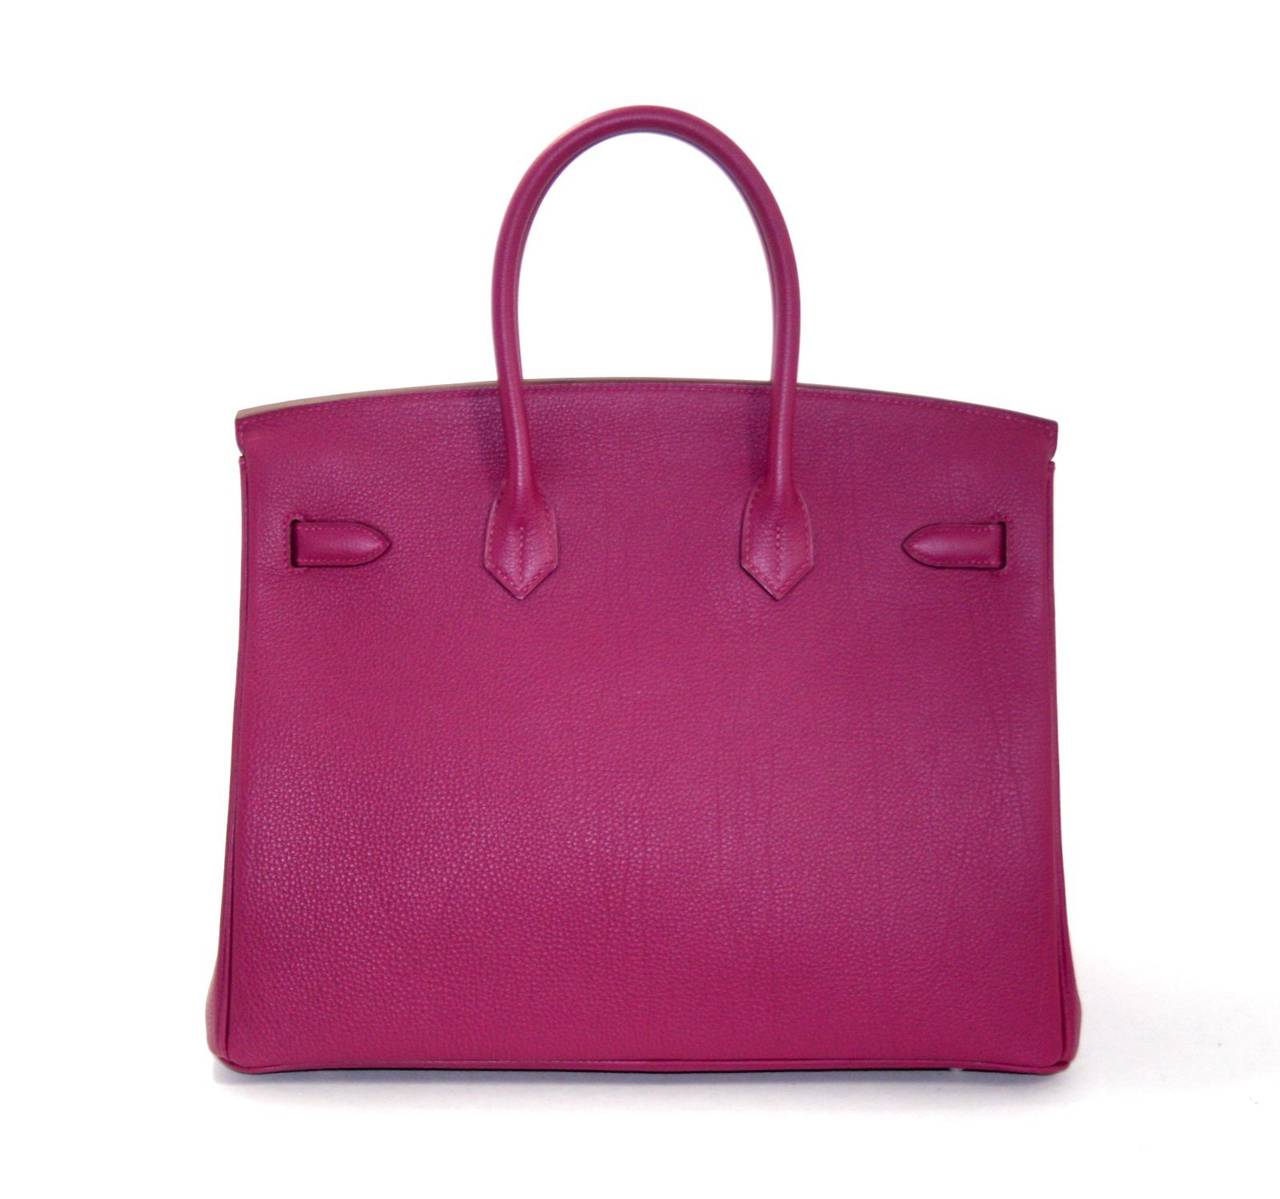 Pristine, store fresh condition (plastic on hardware) Hermès Birkin Bag in Tosca (raspberry pink color) Togo, 35 cm size.   Crafted by hand and considered by many as the epitome of luxury items, Birkins are extremely difficult to get. Scratch